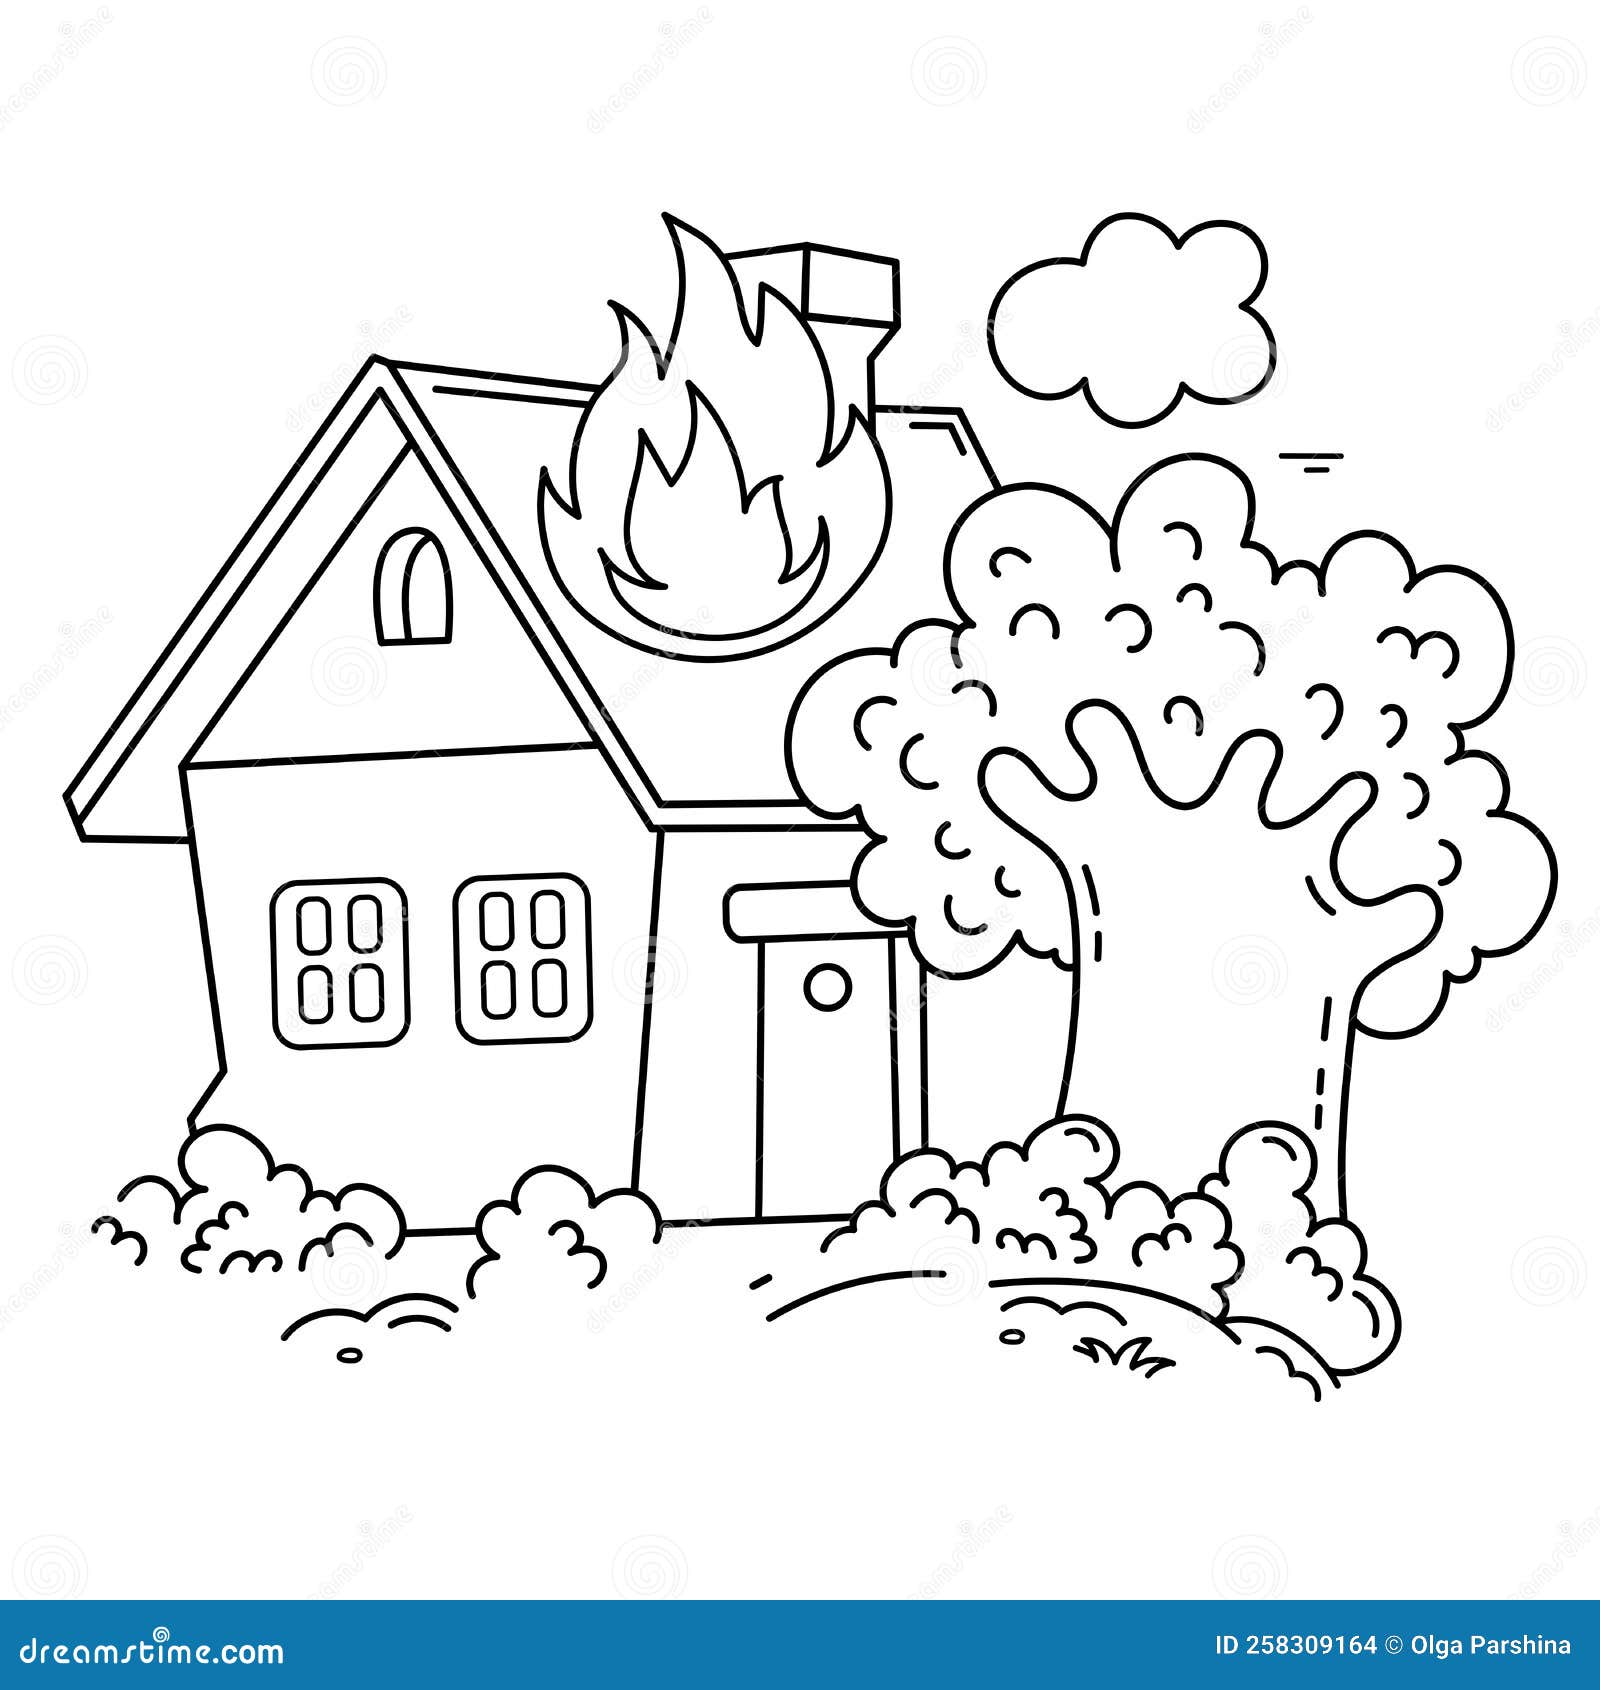 Coloring Page Outline Of Cartoon Burning House. Fire Or Flame. Coloring ...